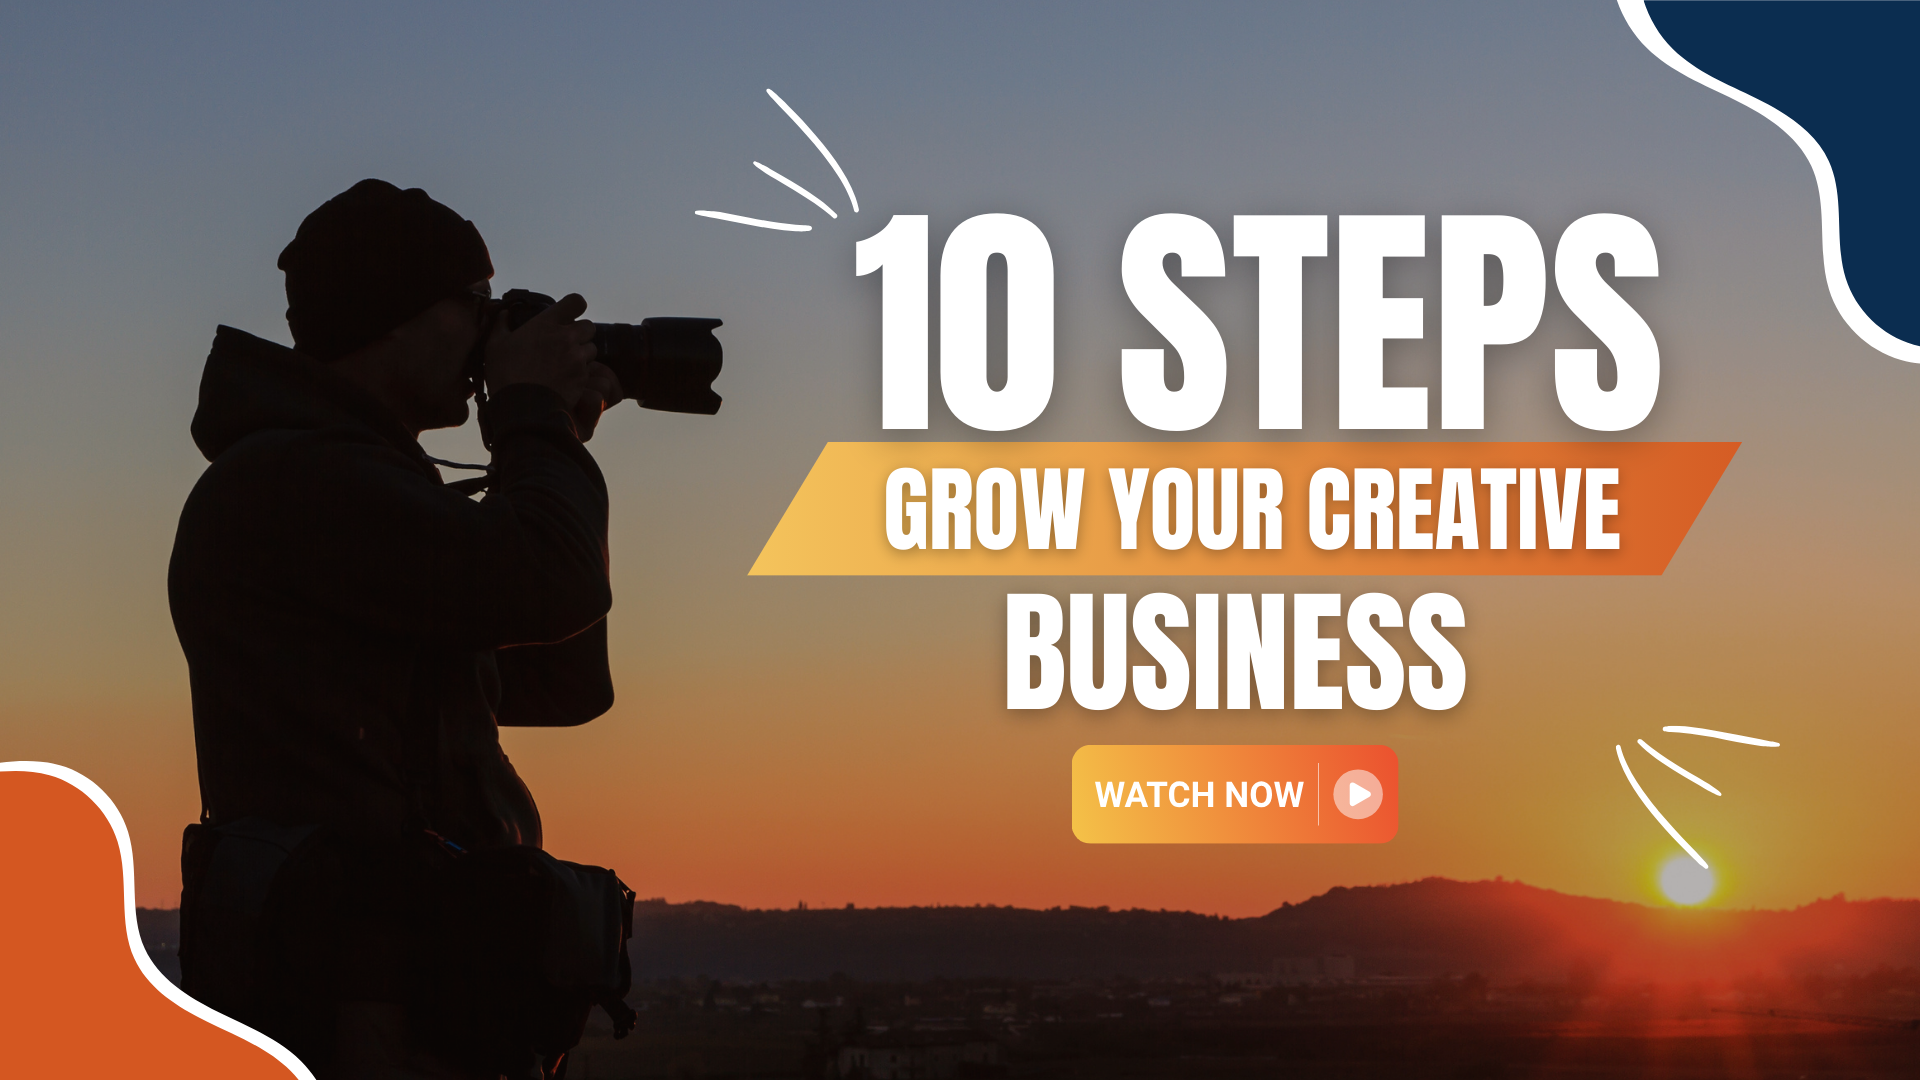 10 STEPS TP GROW YOUR CREATIVE BUSINESS